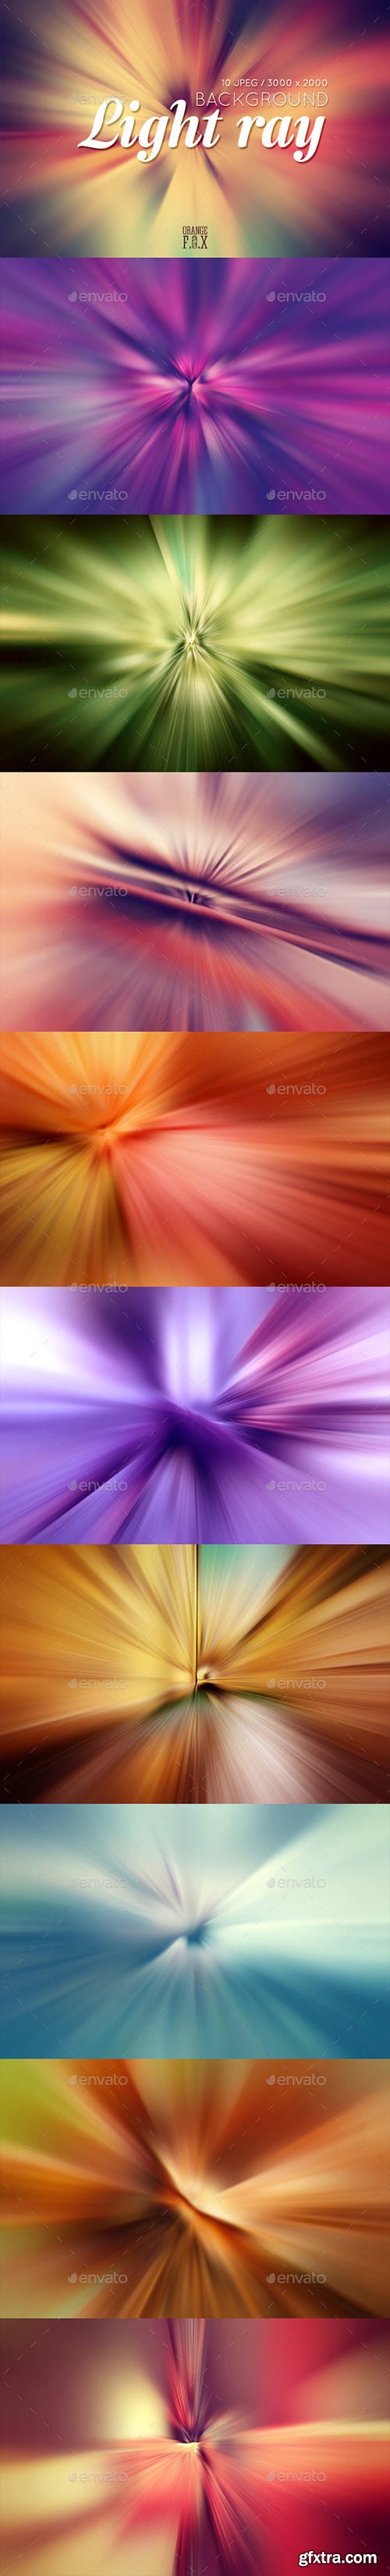 GraphicRiver - 10 Light Ray Backgrounds 11562279